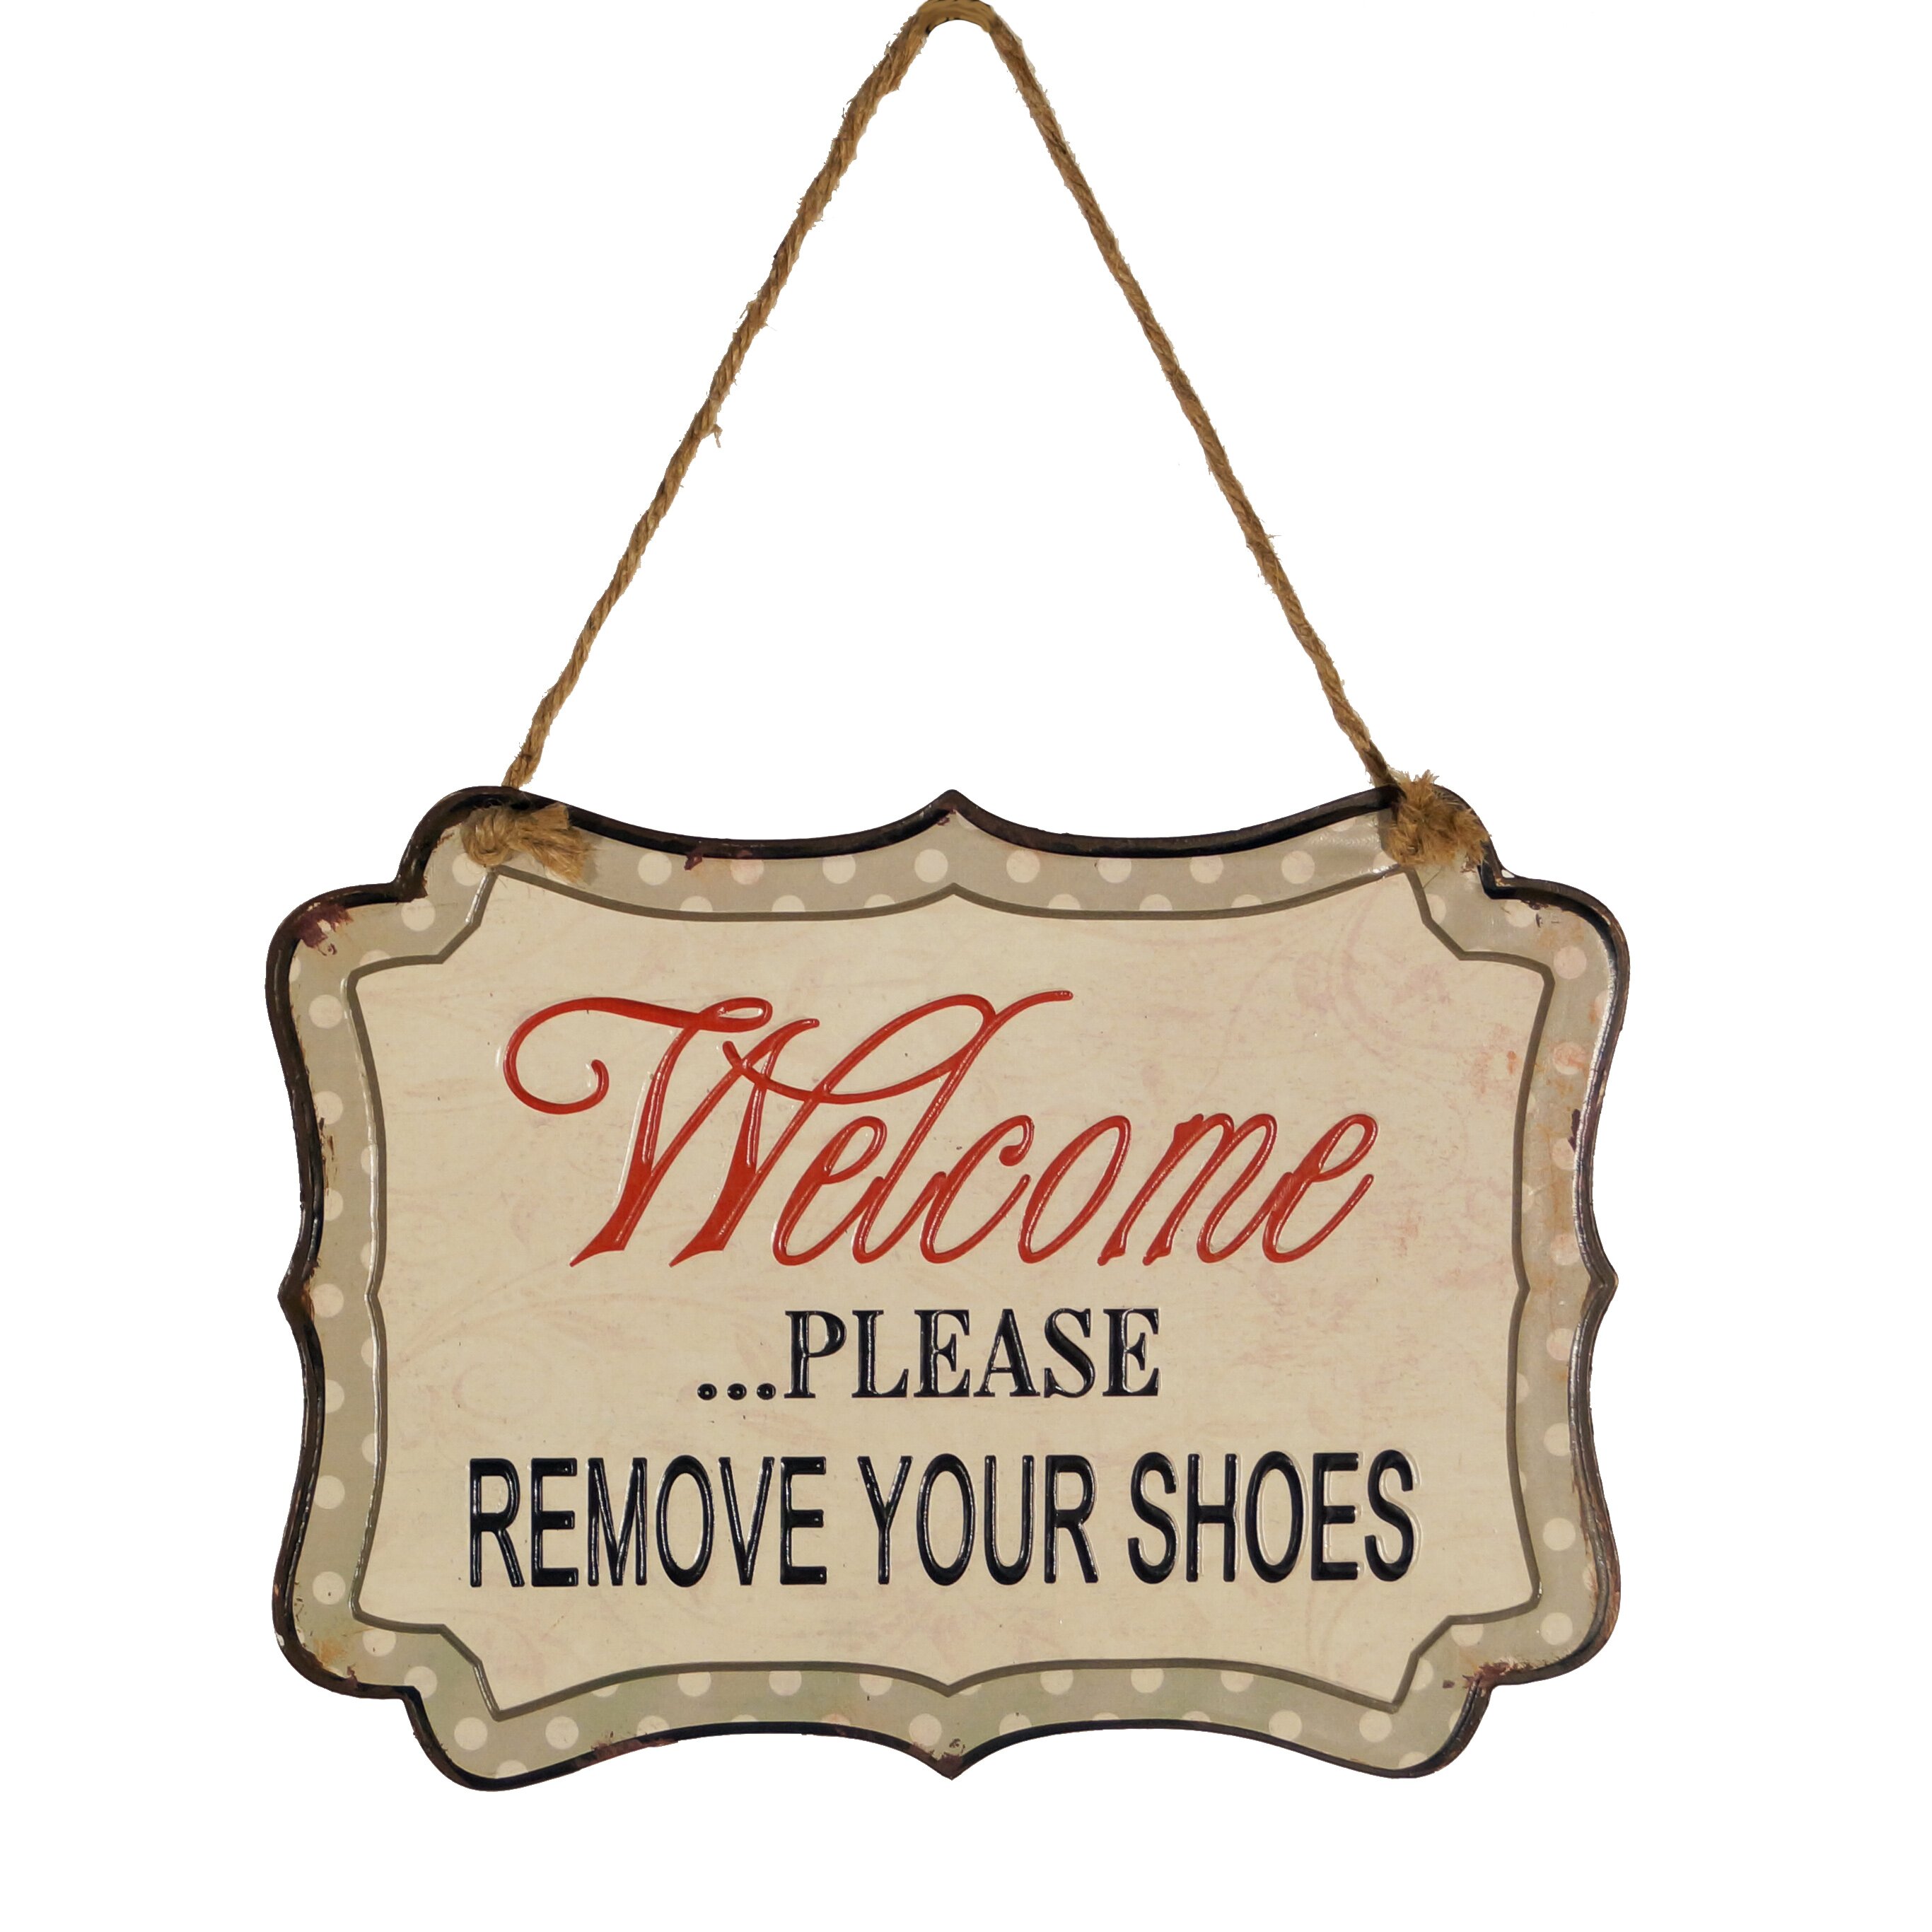 American Mercantile Metal Hanging Sign 'Remove Shoes' Wall Decor ...